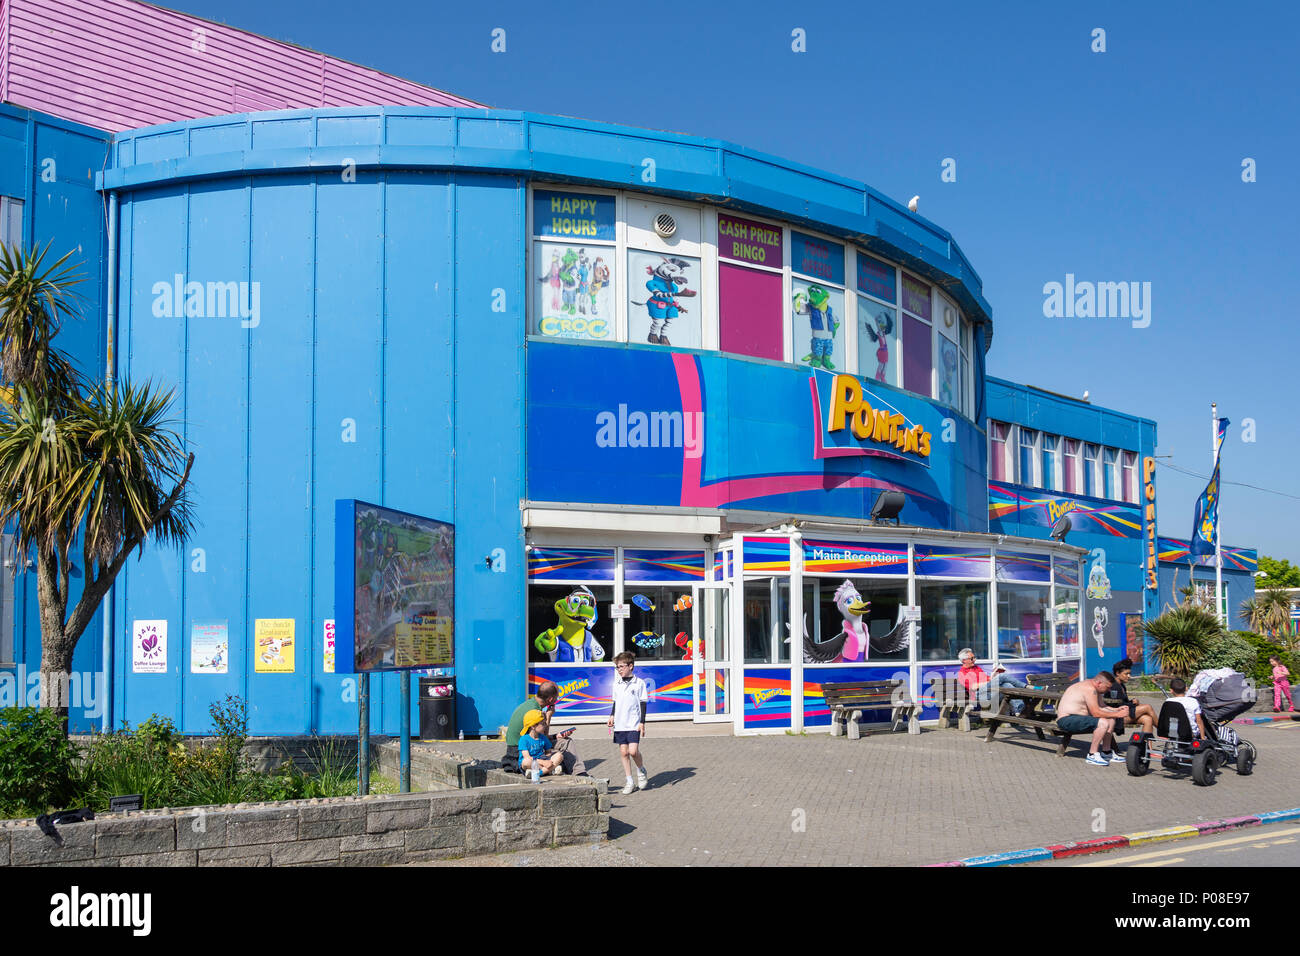 Main reception building at Pontins Camber Sands Holiday Park, Camber, East Sussex, England, United Kingdom Stock Photo